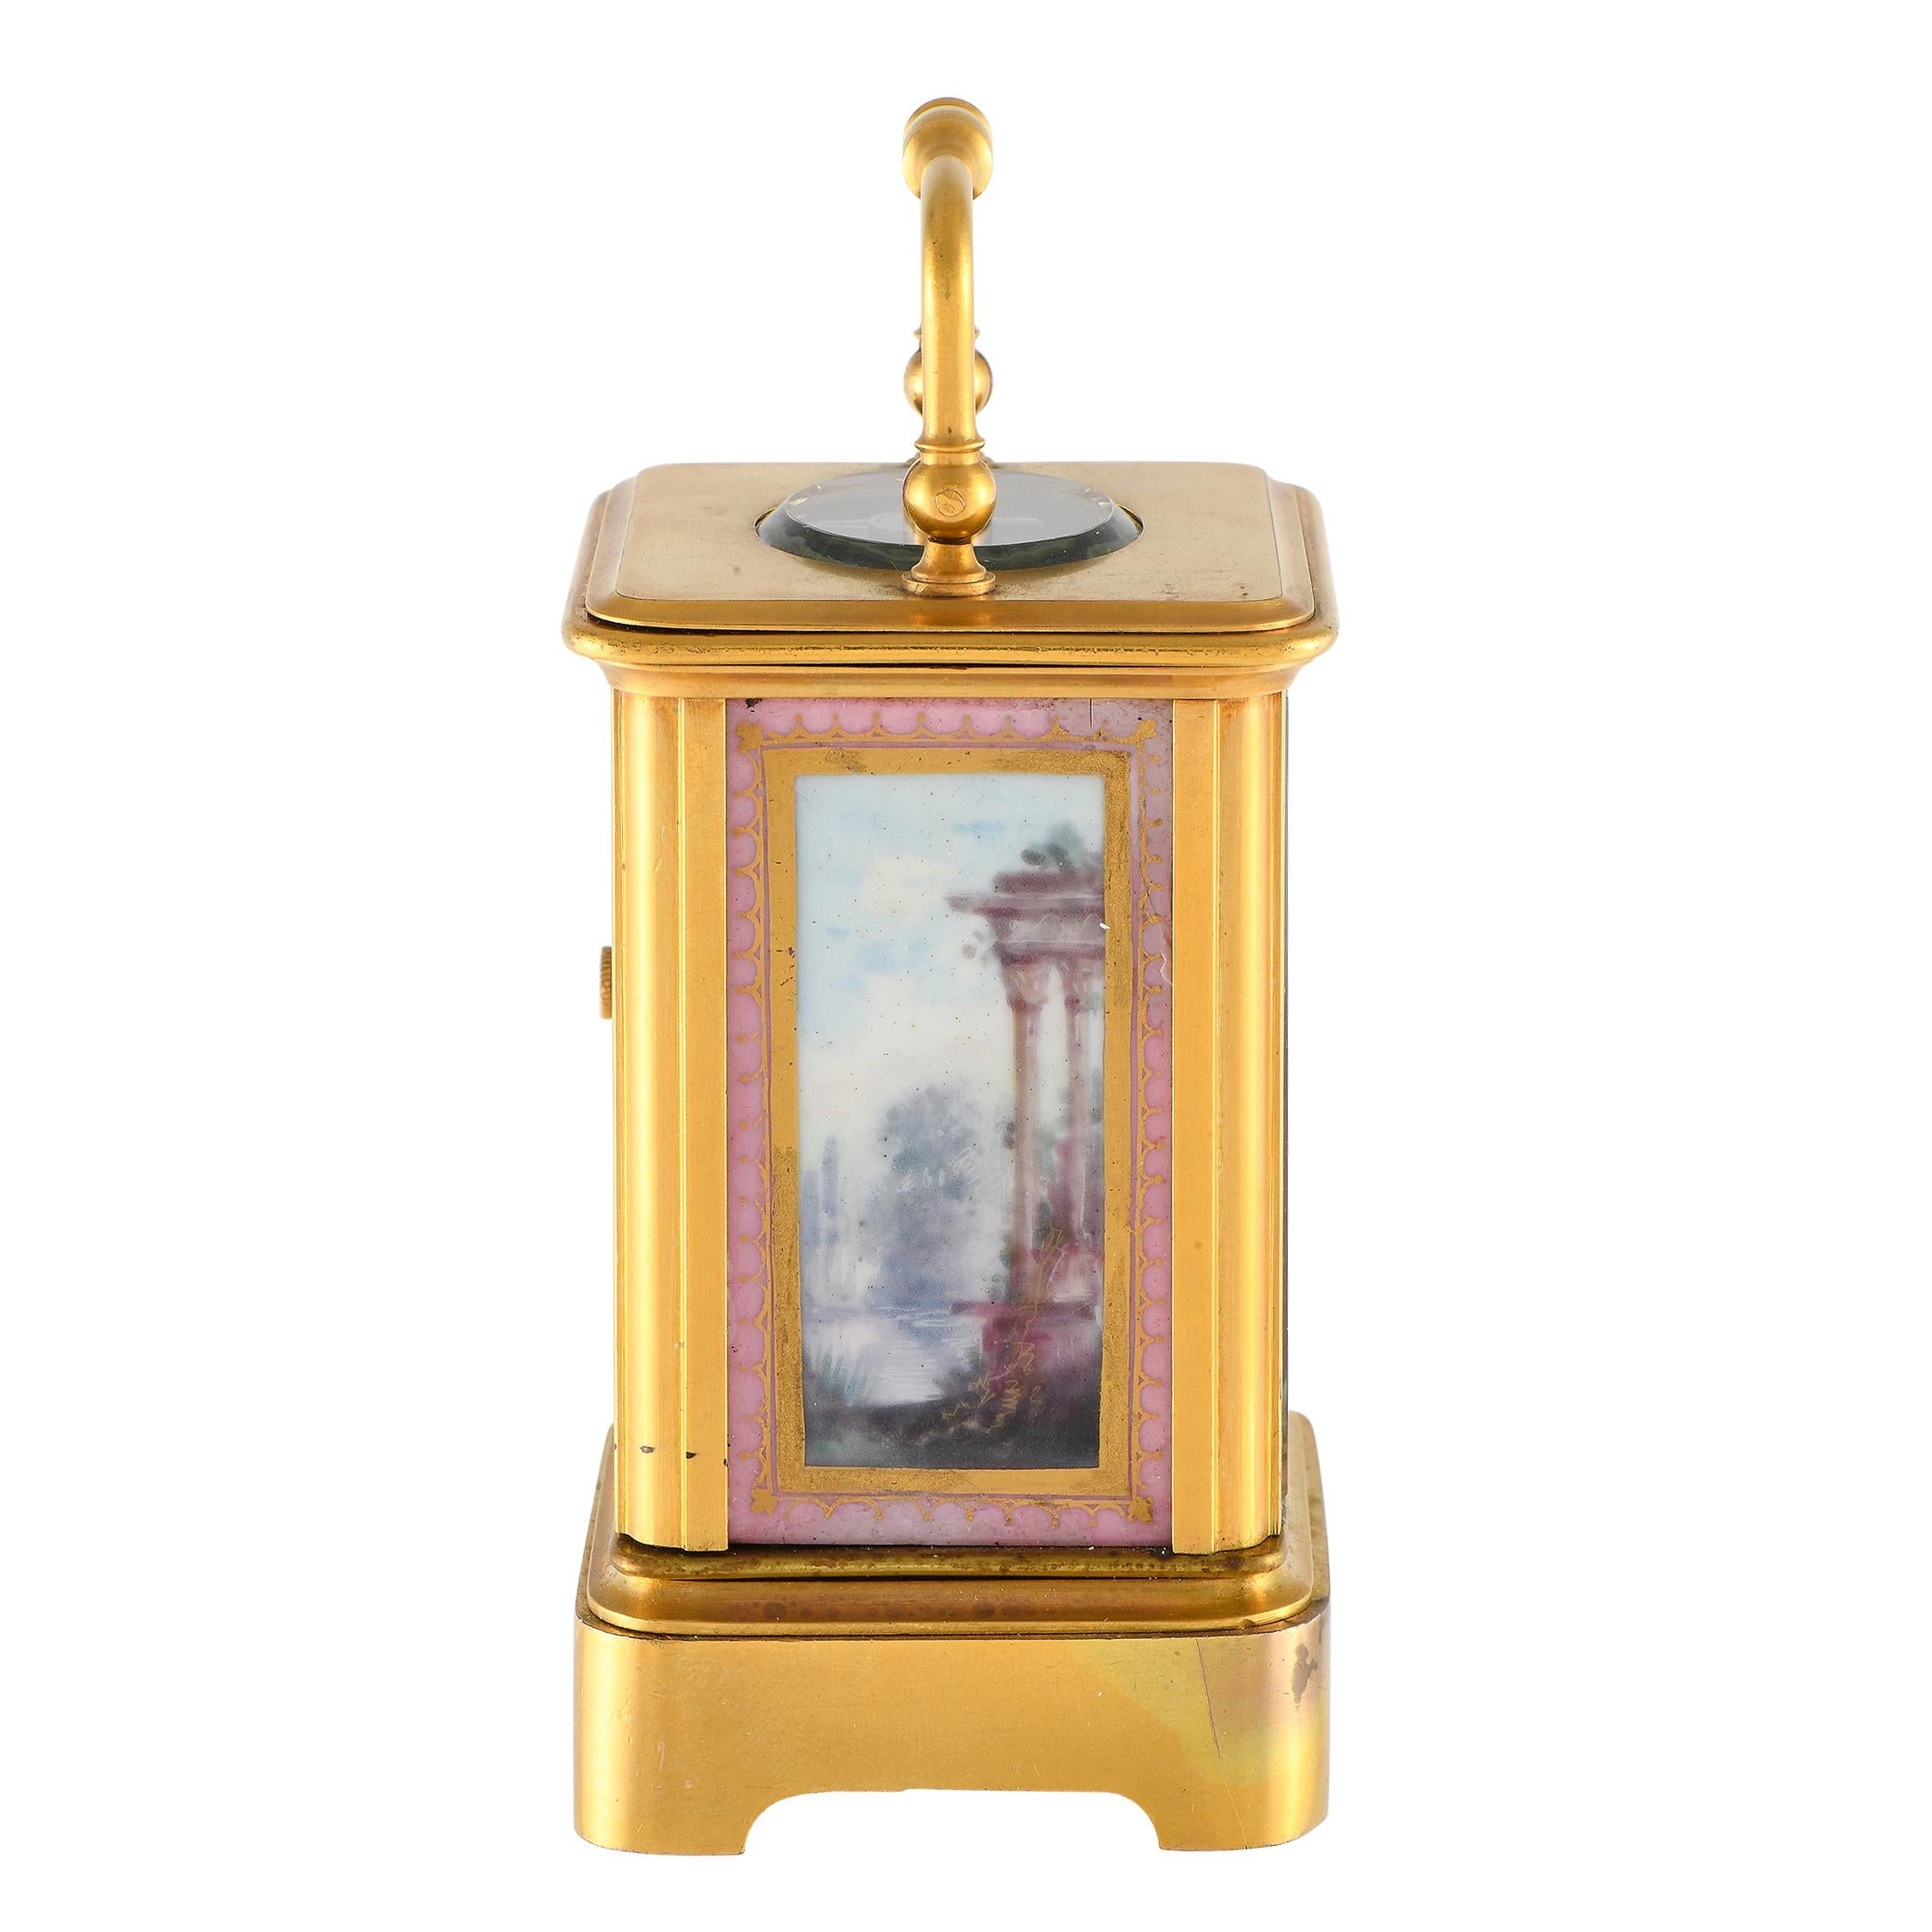 Track and remember the passage of time with this antique French carriage clock in brass and enamel. This miniature table clock features an oval glass escapement window on top, with an elegant handle. Hand-painted scenes are seen on the porcelain